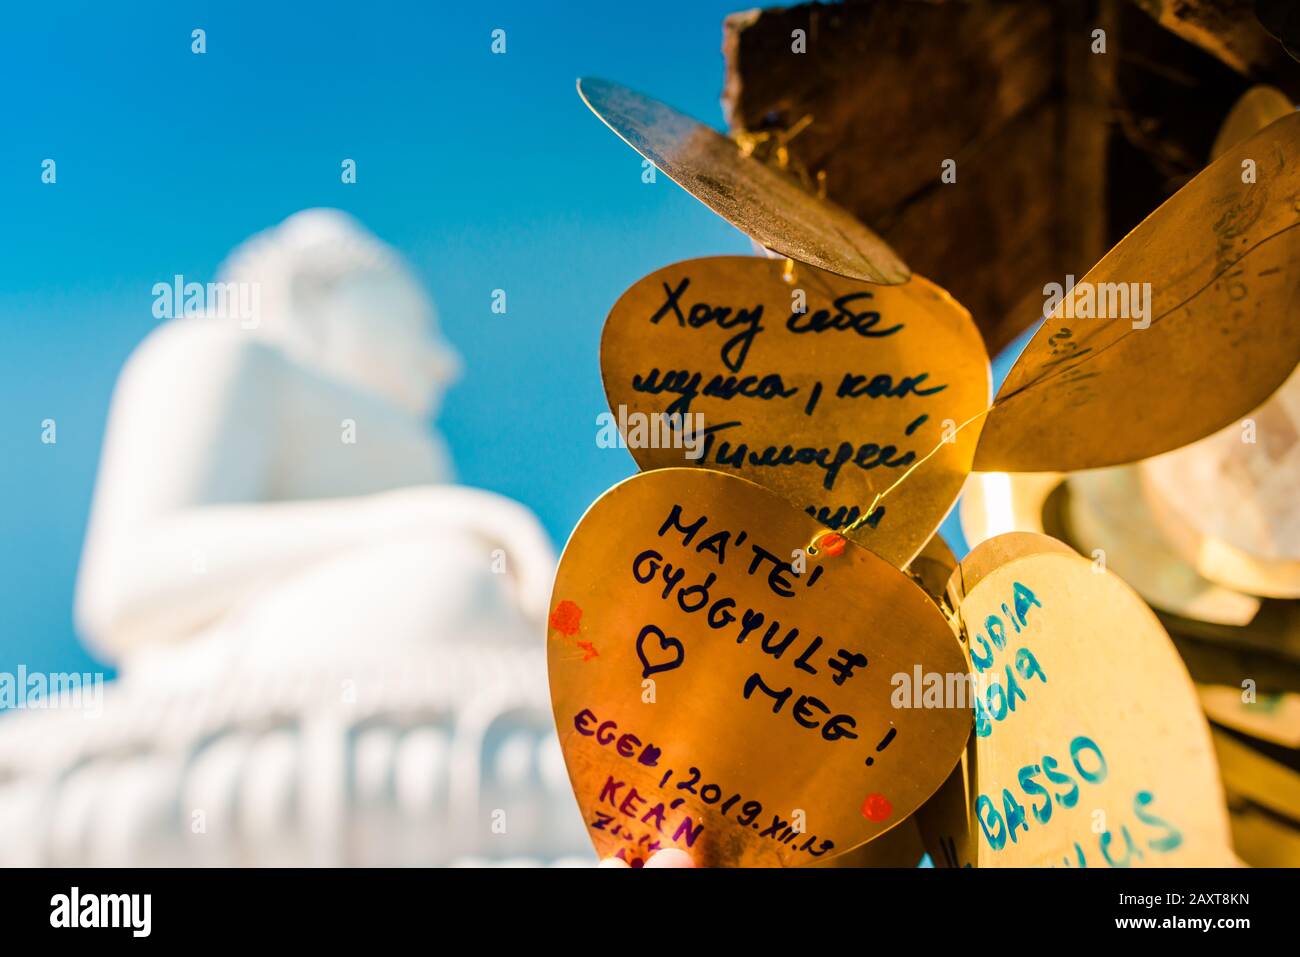 Nakkerd Hill, Phuket/Thailand-15December2019: Golden heart shaped praying bells hanging together in a row with people spiritual notes written on them Stock Photo